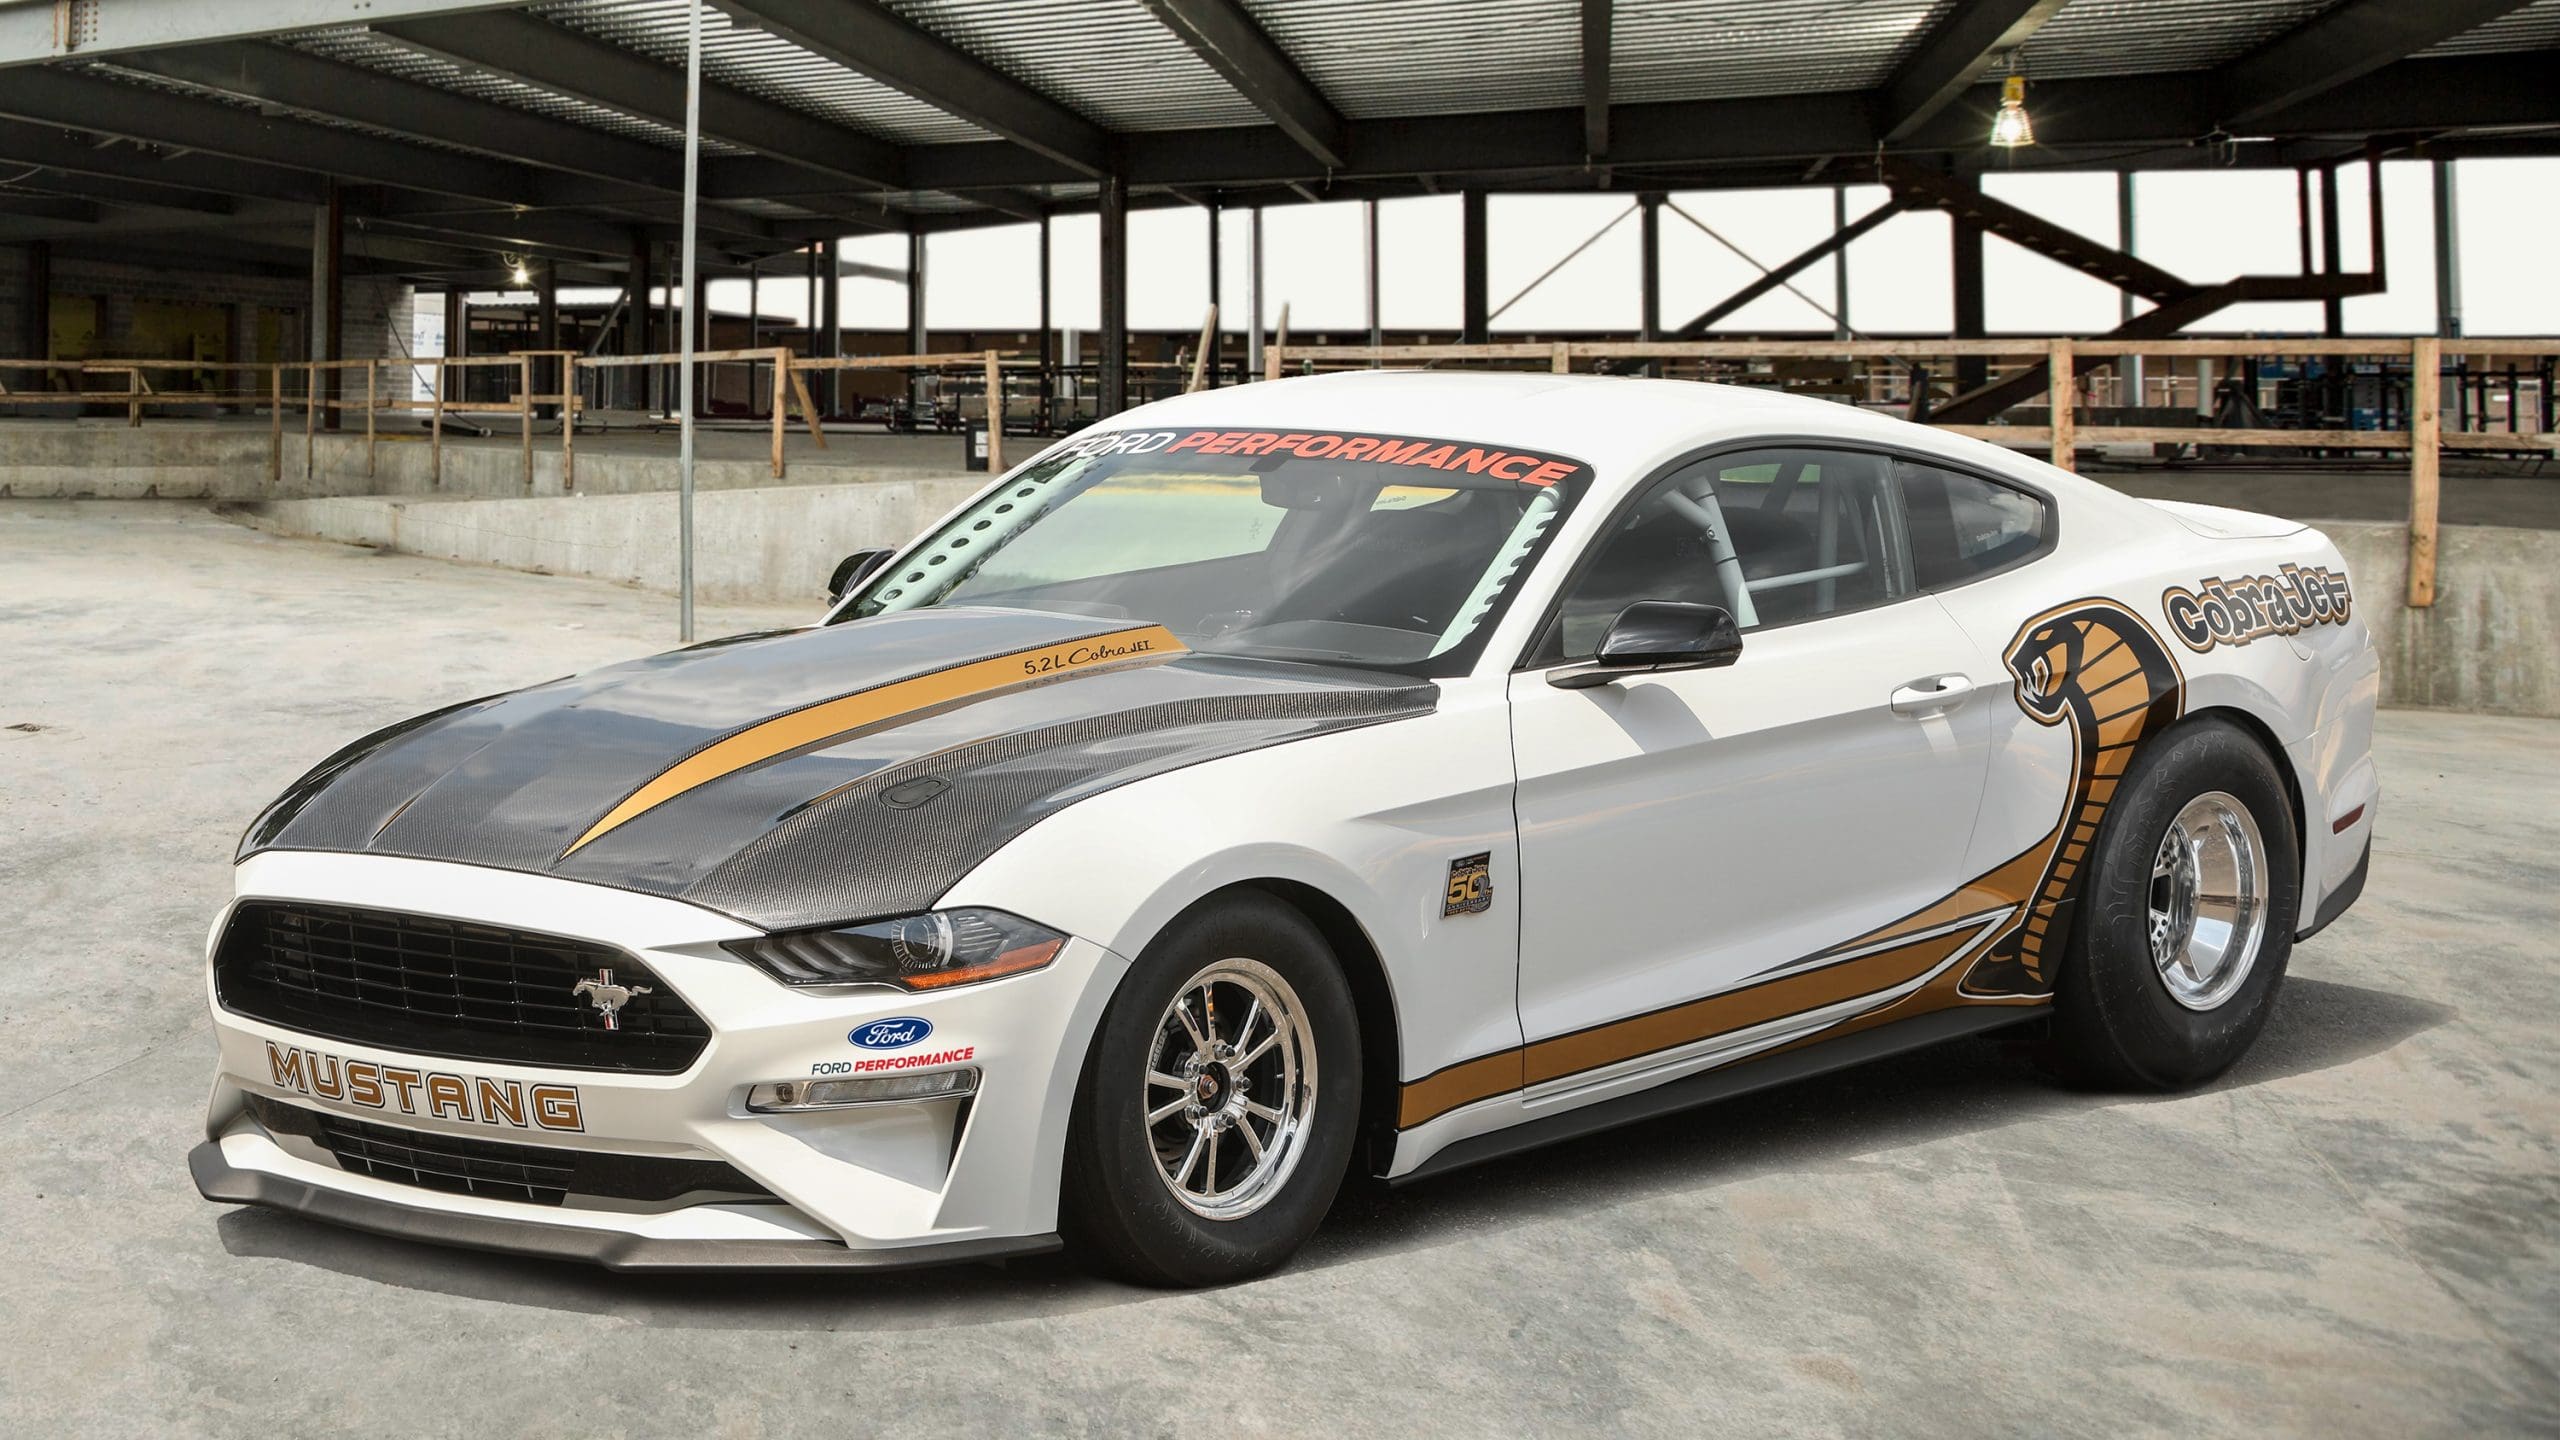 Mustang Of The Day: 2018 Ford Mustang Cobra Jet